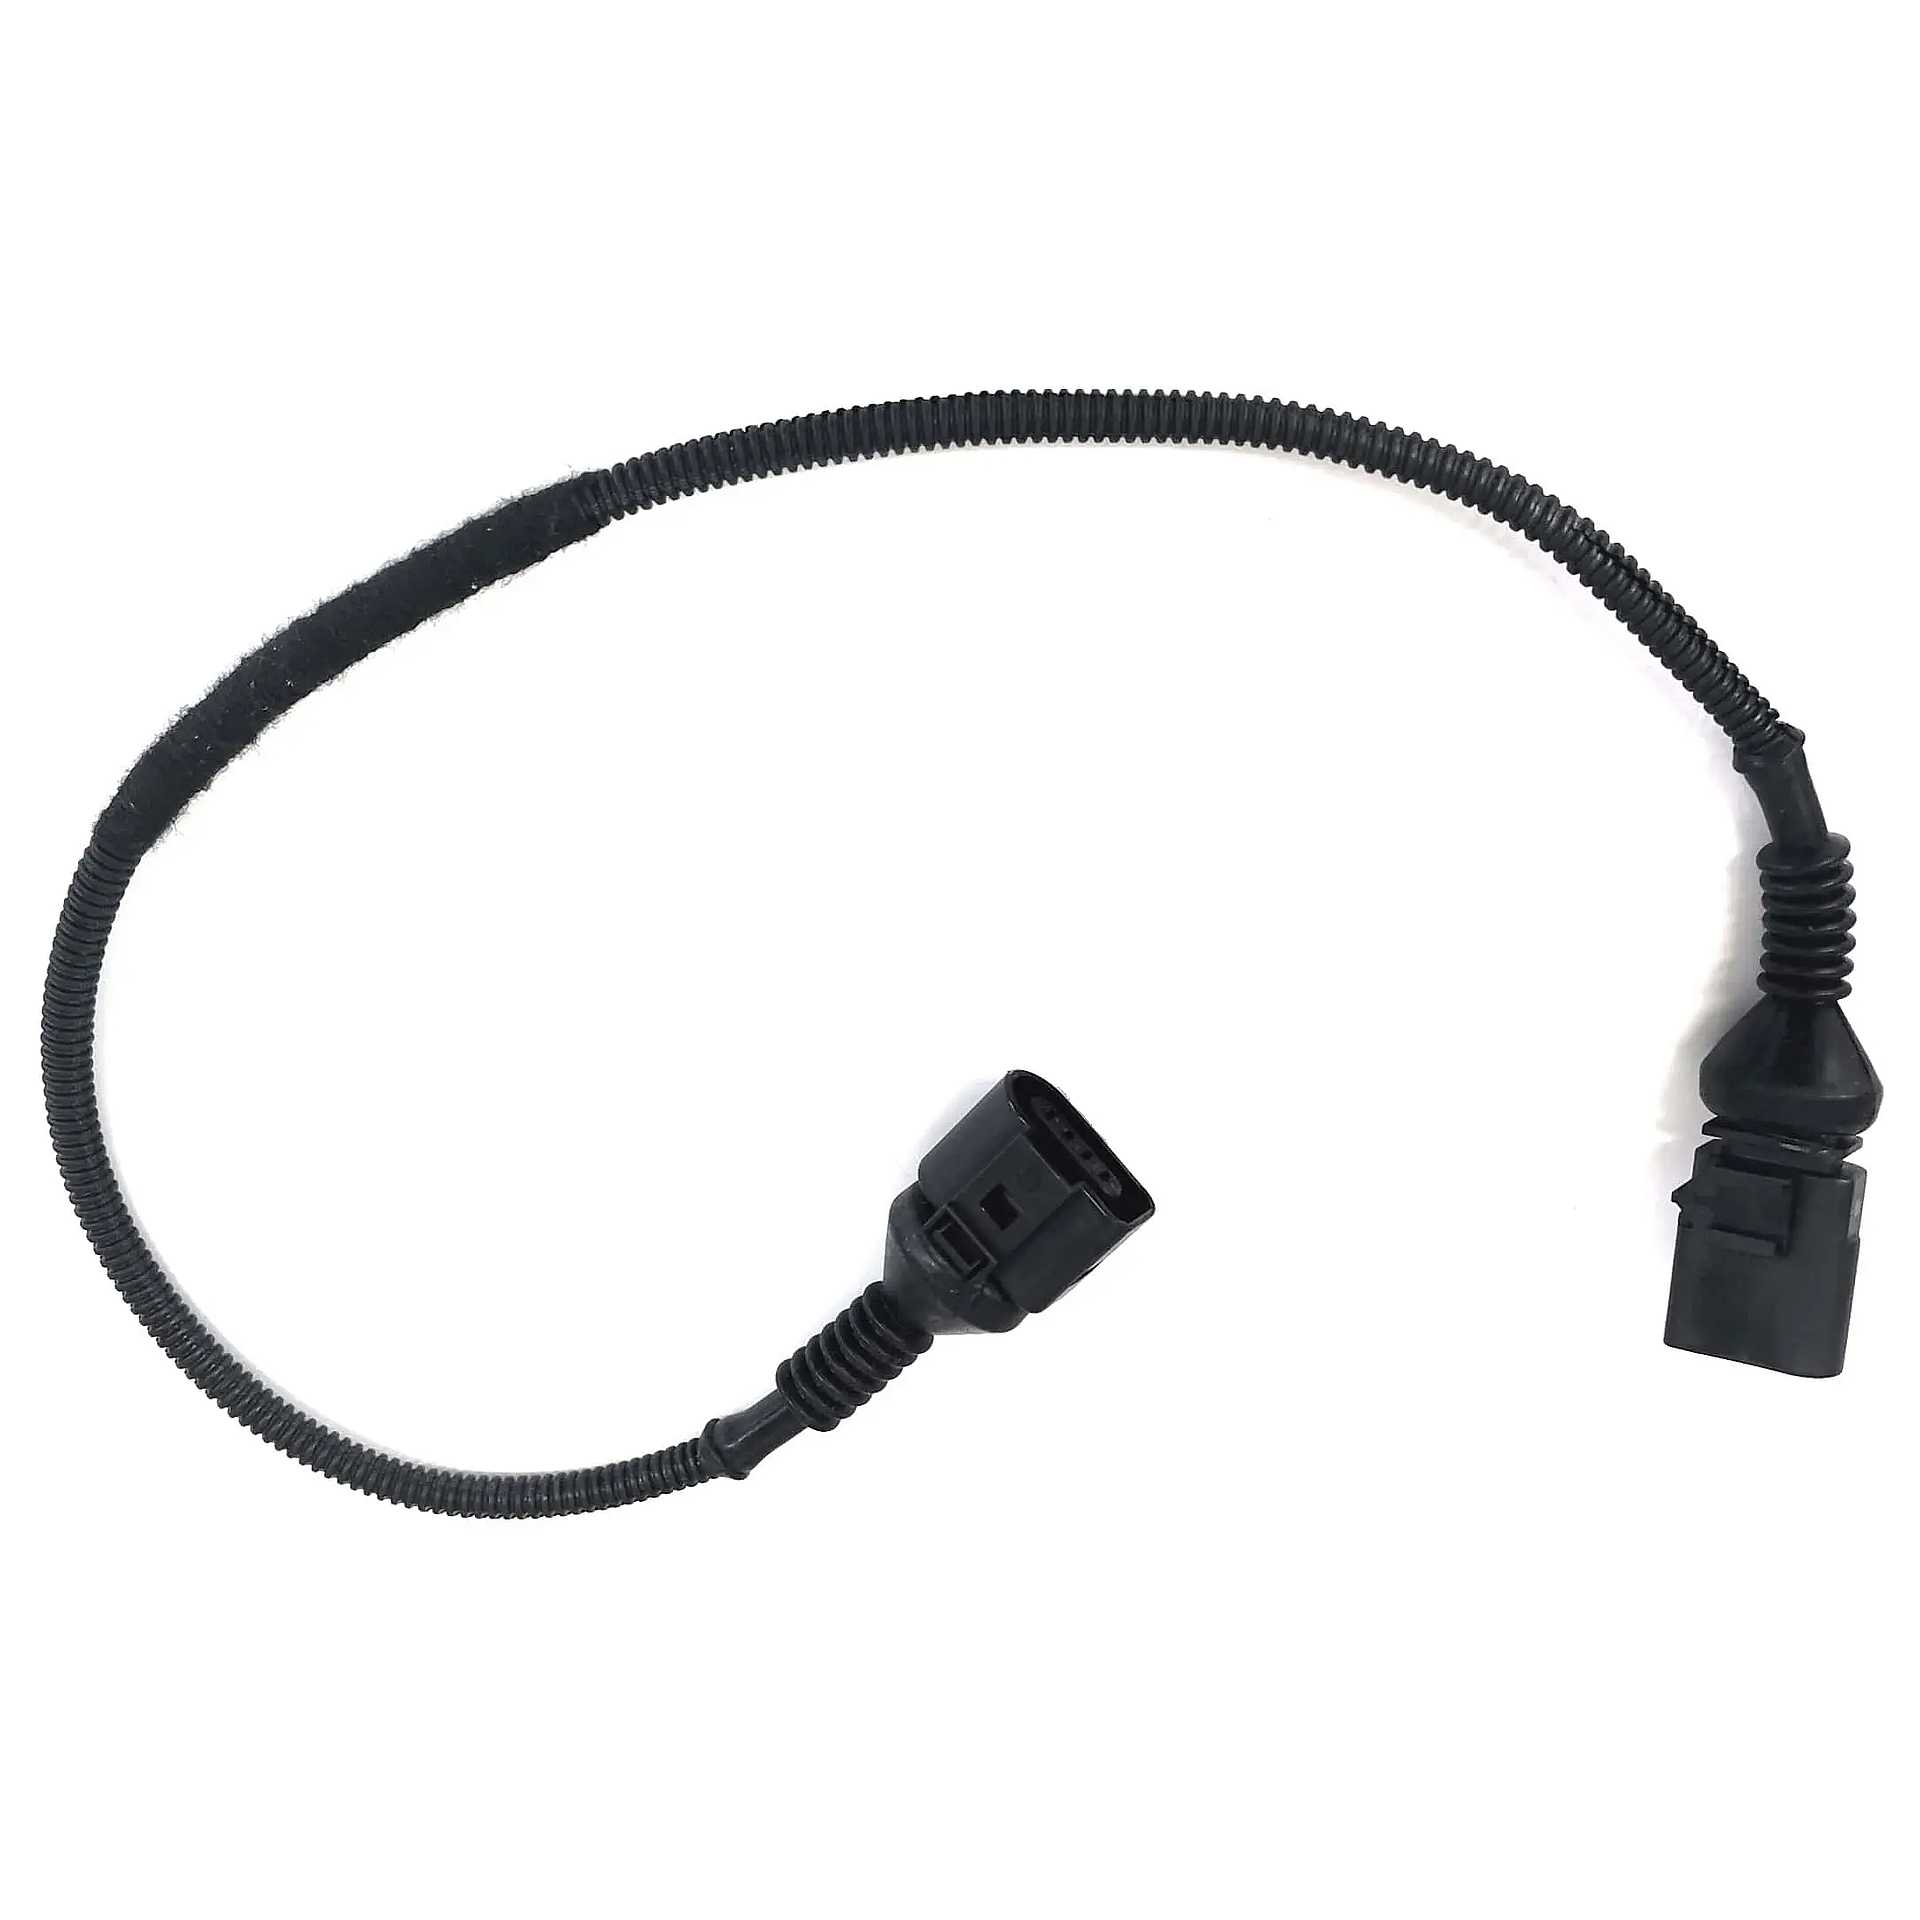 2.0L TFSI EA113 Cable extension for air mass meter